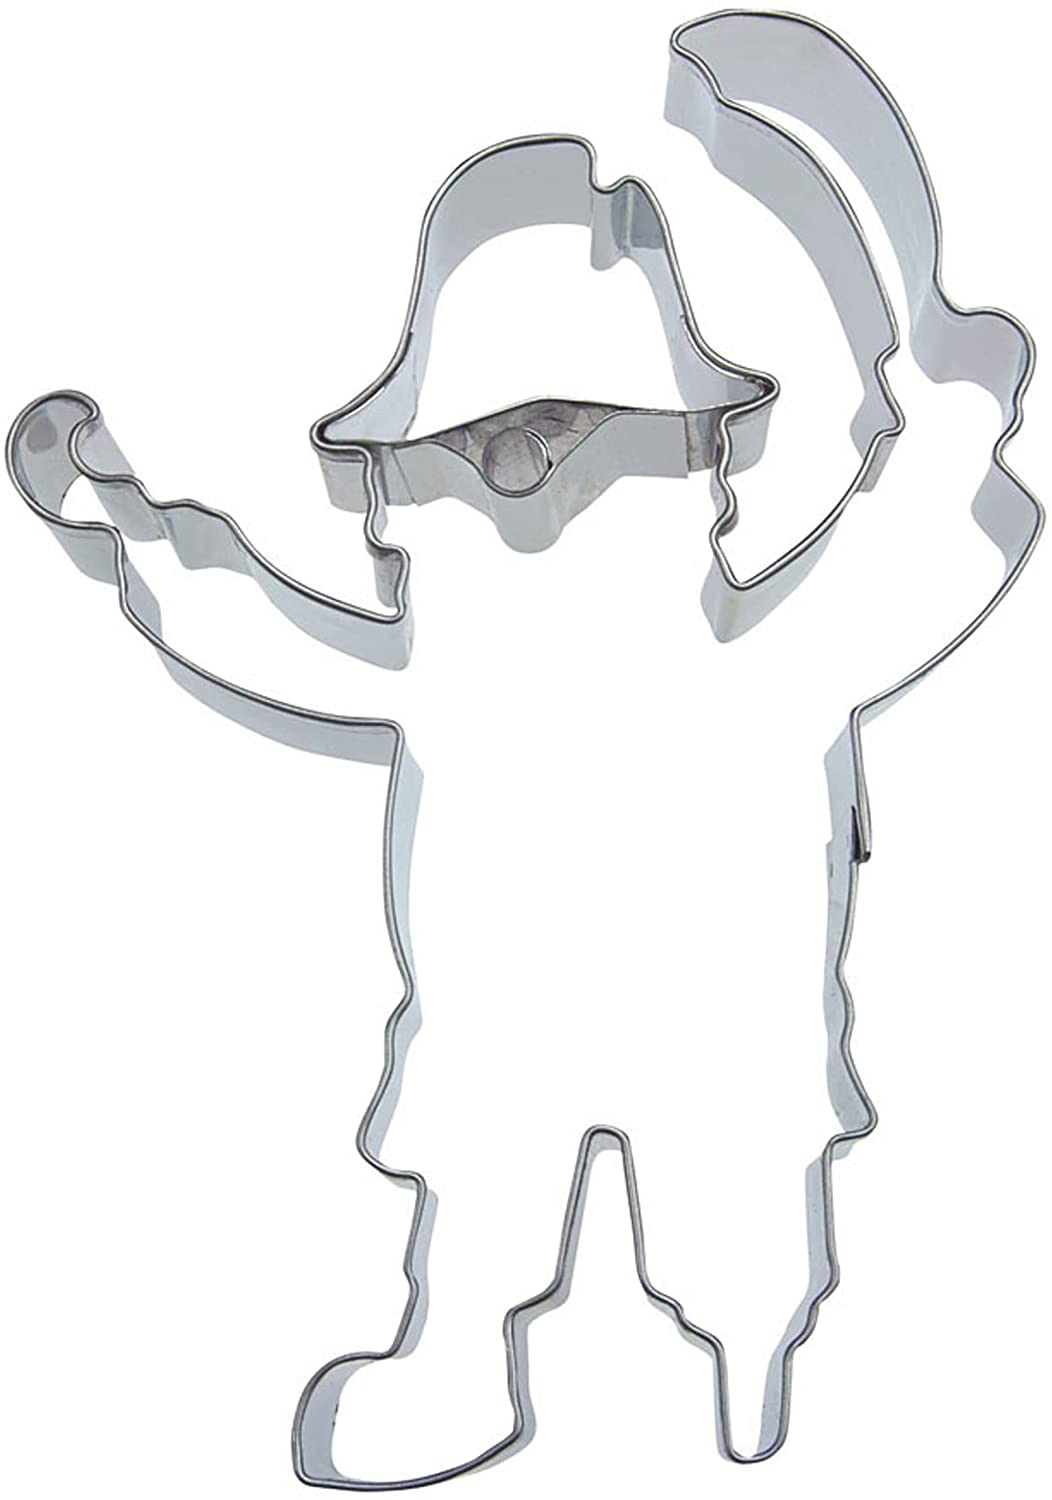 Staedter Pirate Cookie Cutter, Stainless Steel, 11 Cm